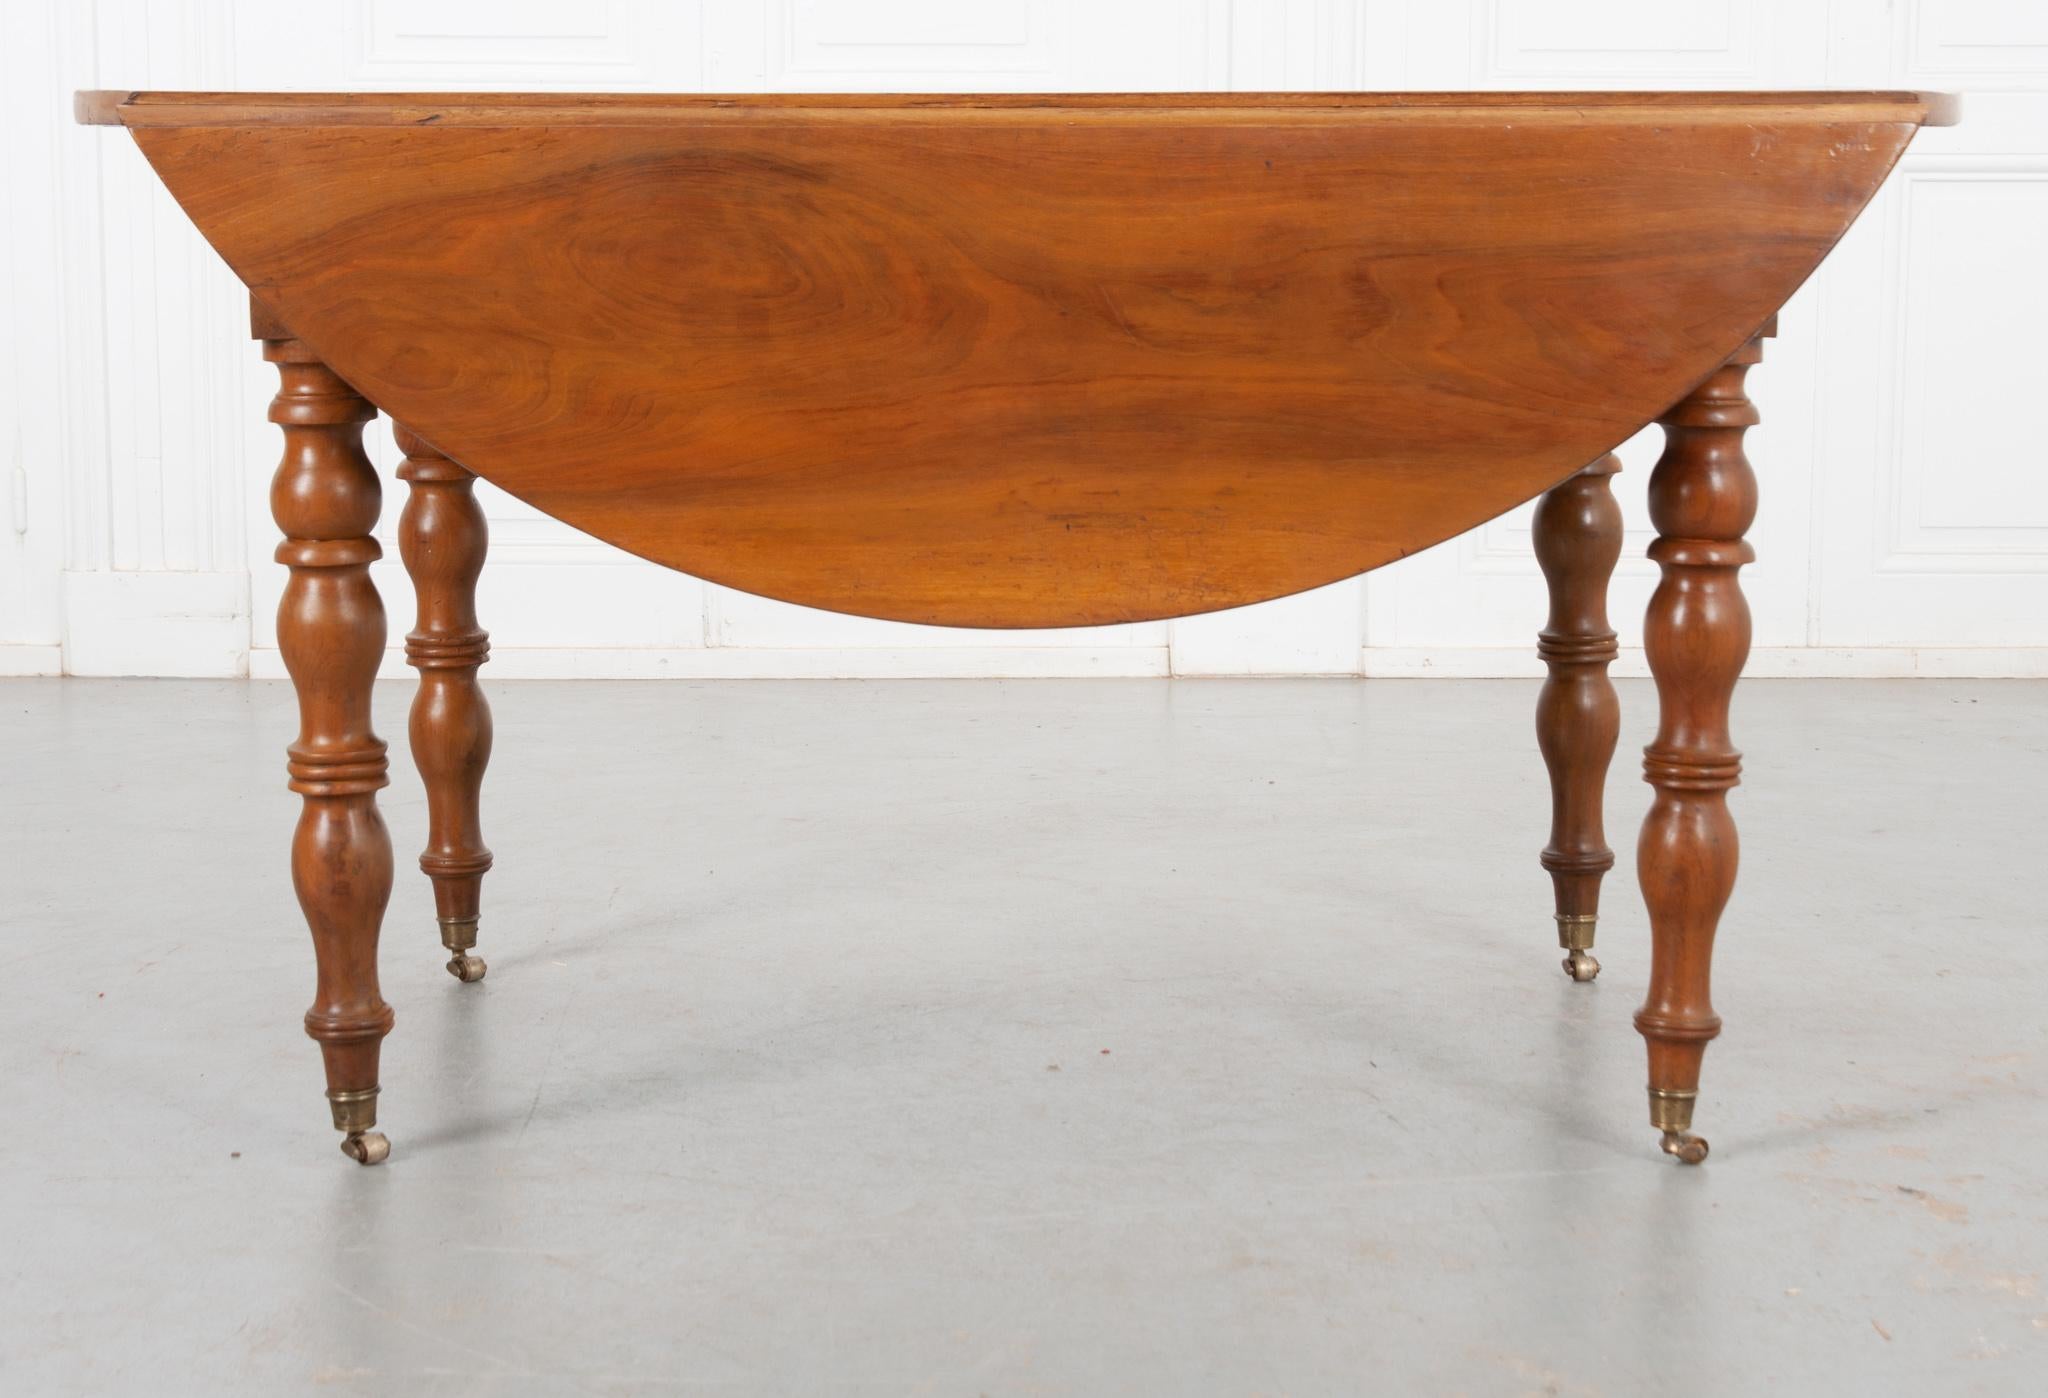 This French 19th century drop leaf table is made from wonderfully smooth fruitwood! It opens into a circular shape with the leaves up and fits approximately four chairs. When the leaves are down it would be great behind a sofa and measures 27-¾”H x